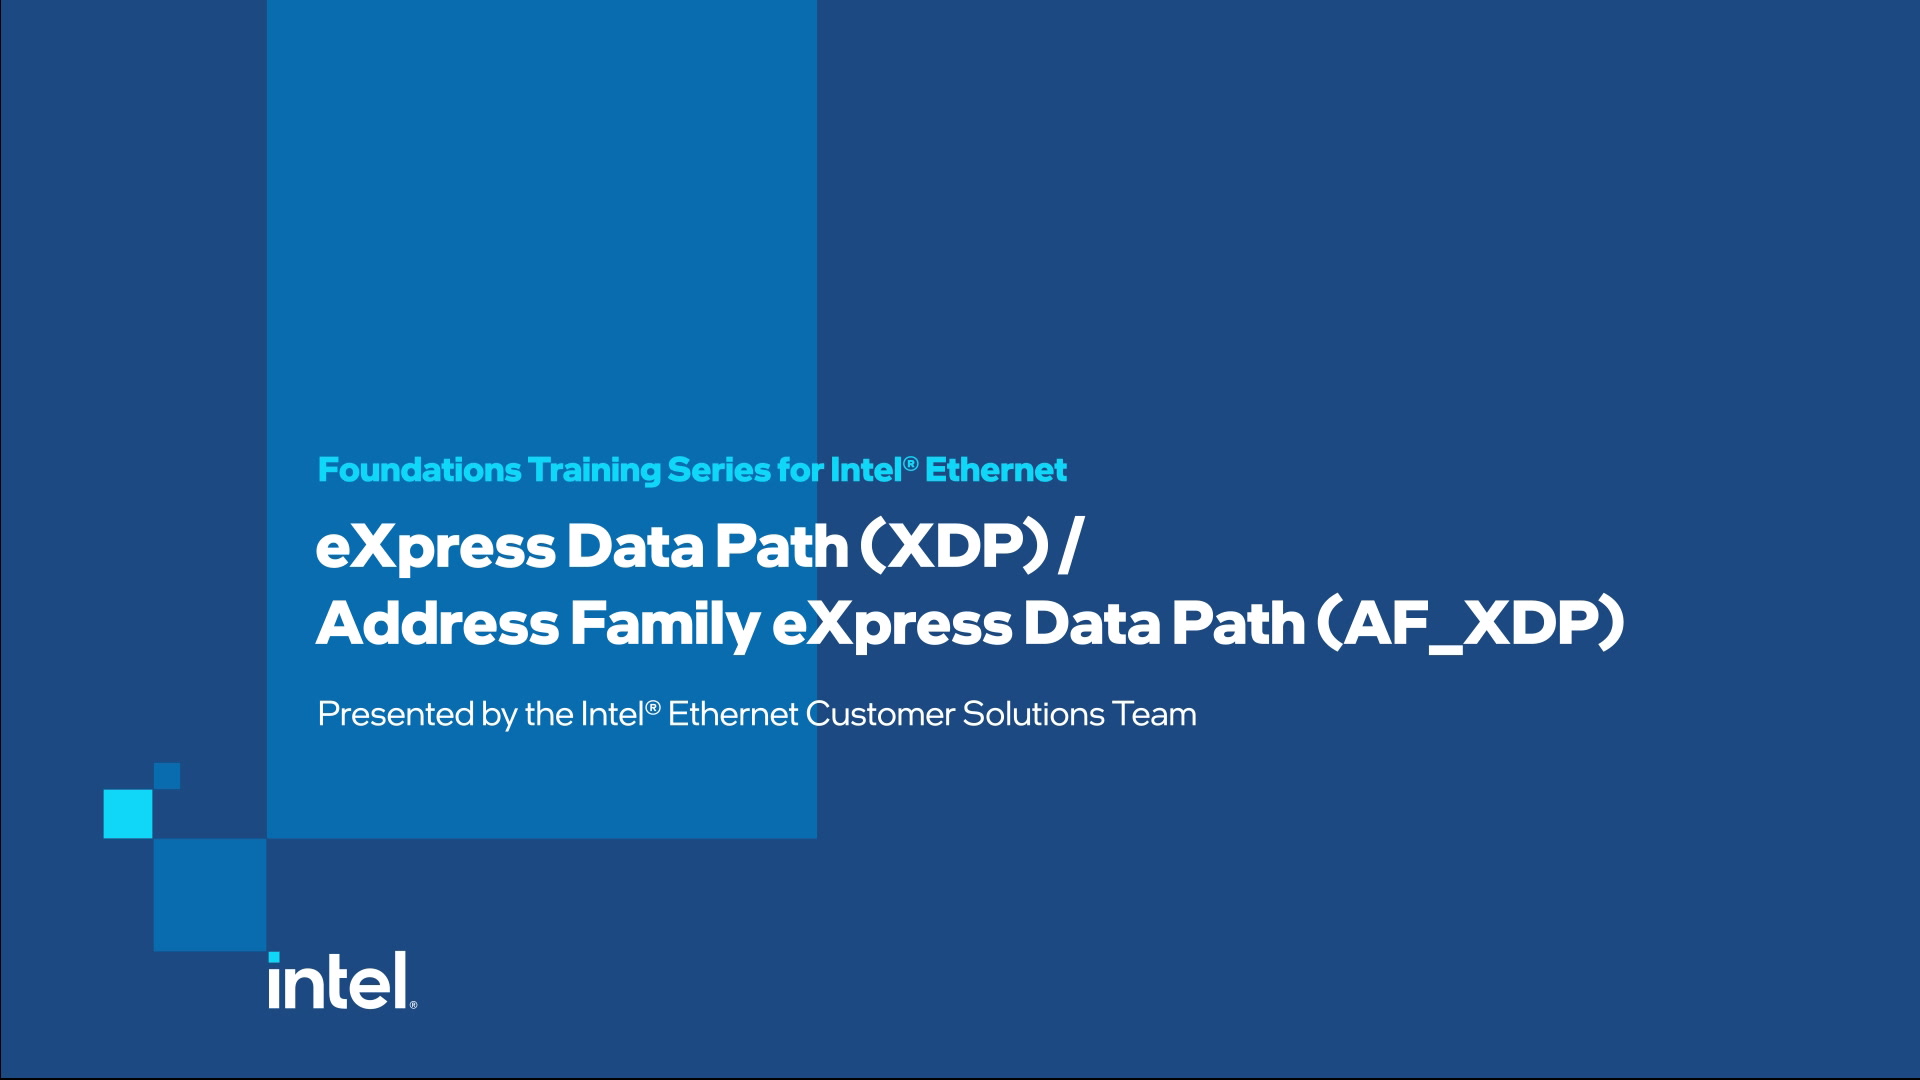 eXpress Data Path (XDP) and Address Family eXpress Data Path (AF_XDP)